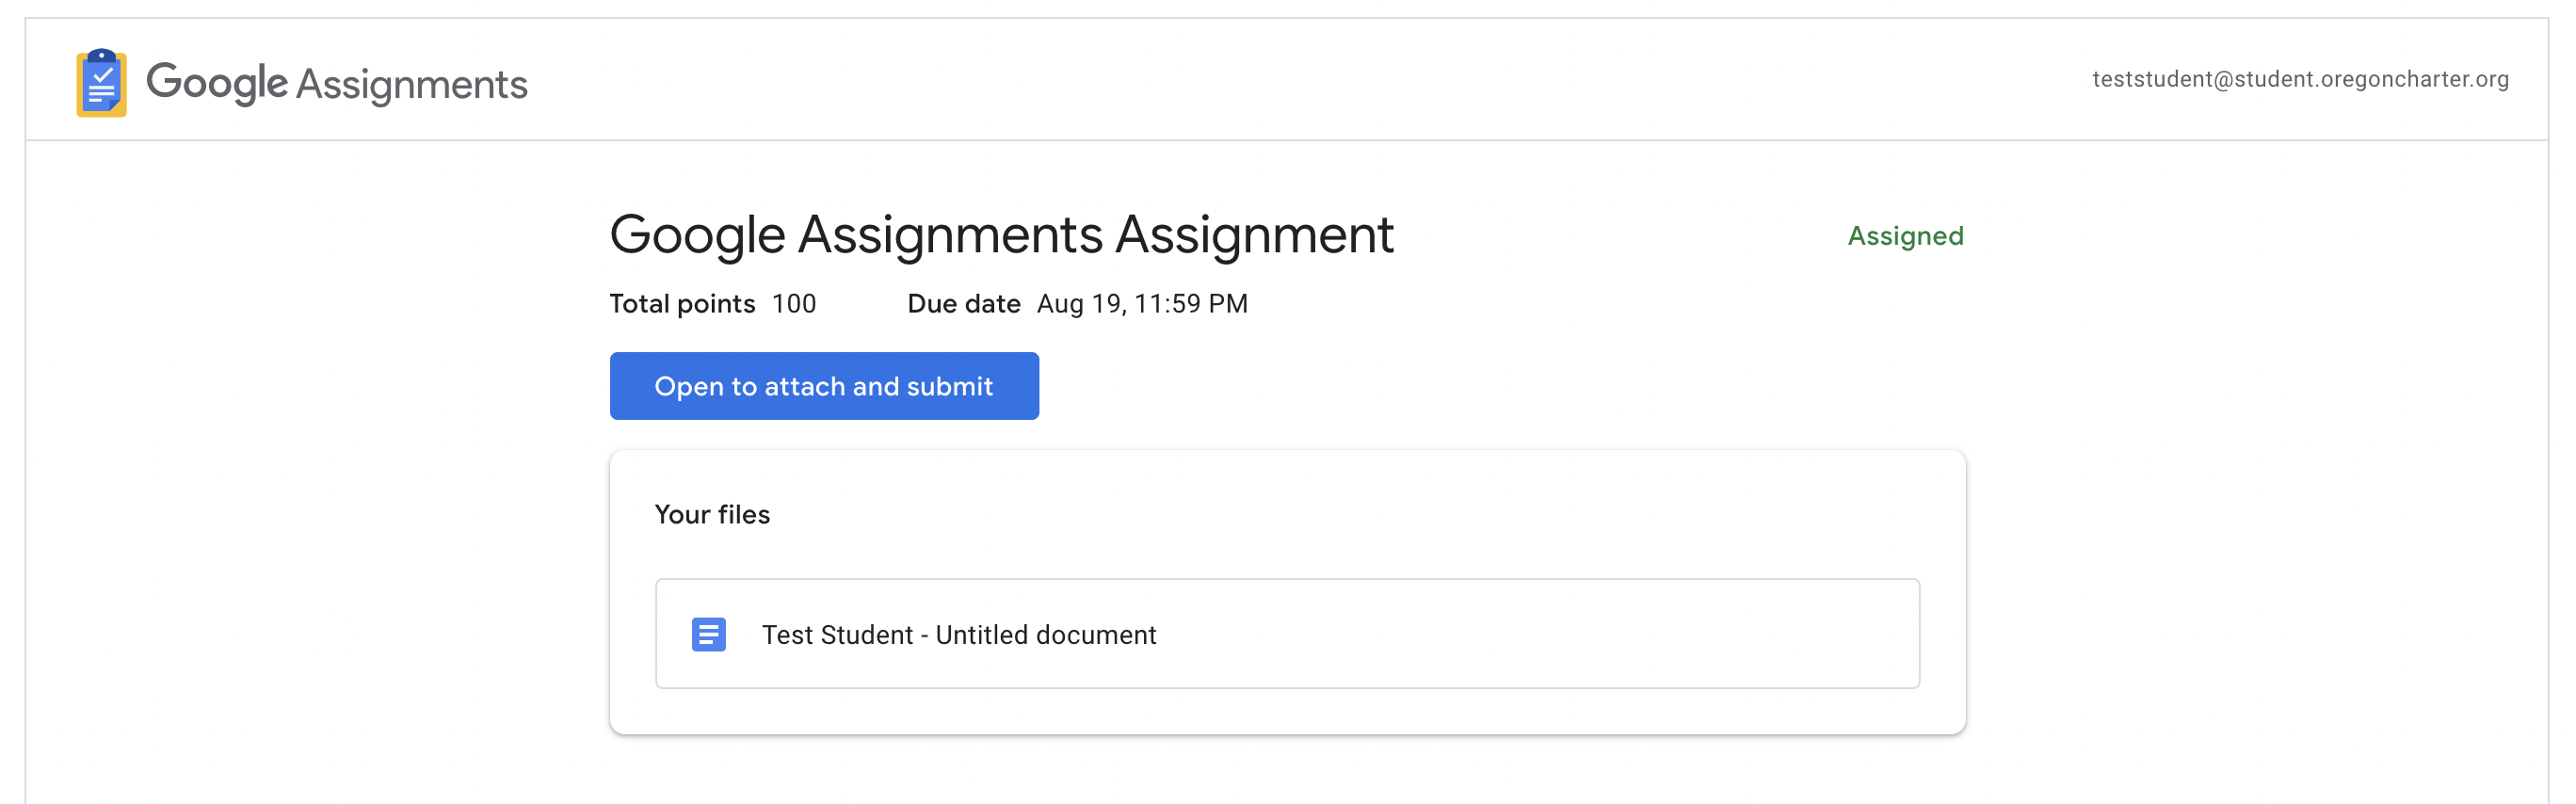 google form as canvas assignment